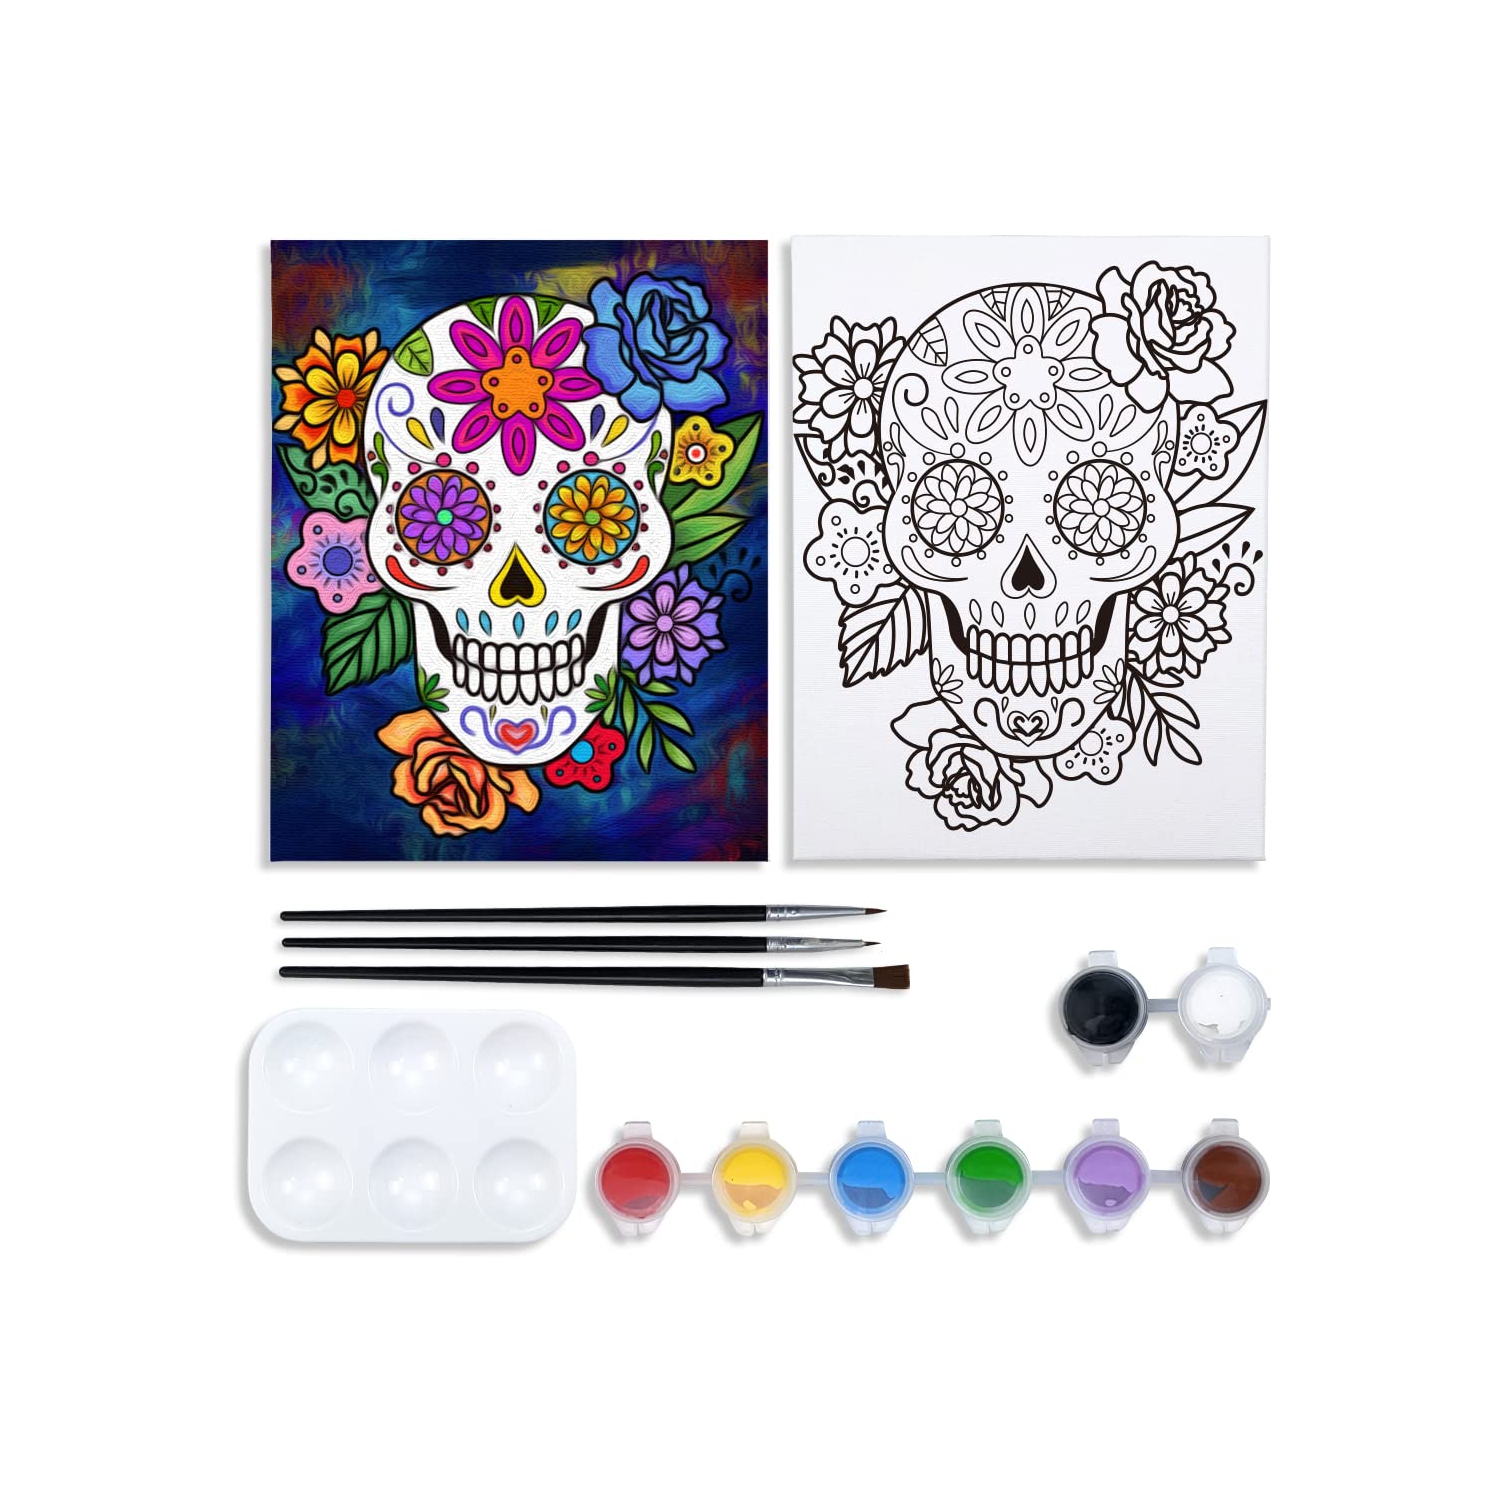 Mexican Fiesta Canvas Painting Kit - Pre Drawn Canvas for Adults, Da de Muertos Party Supplies - Paint and Sip with 8x10 Canvas, 8 Acrylic Colors, 3 Brushes, and 1 Palette - Comple